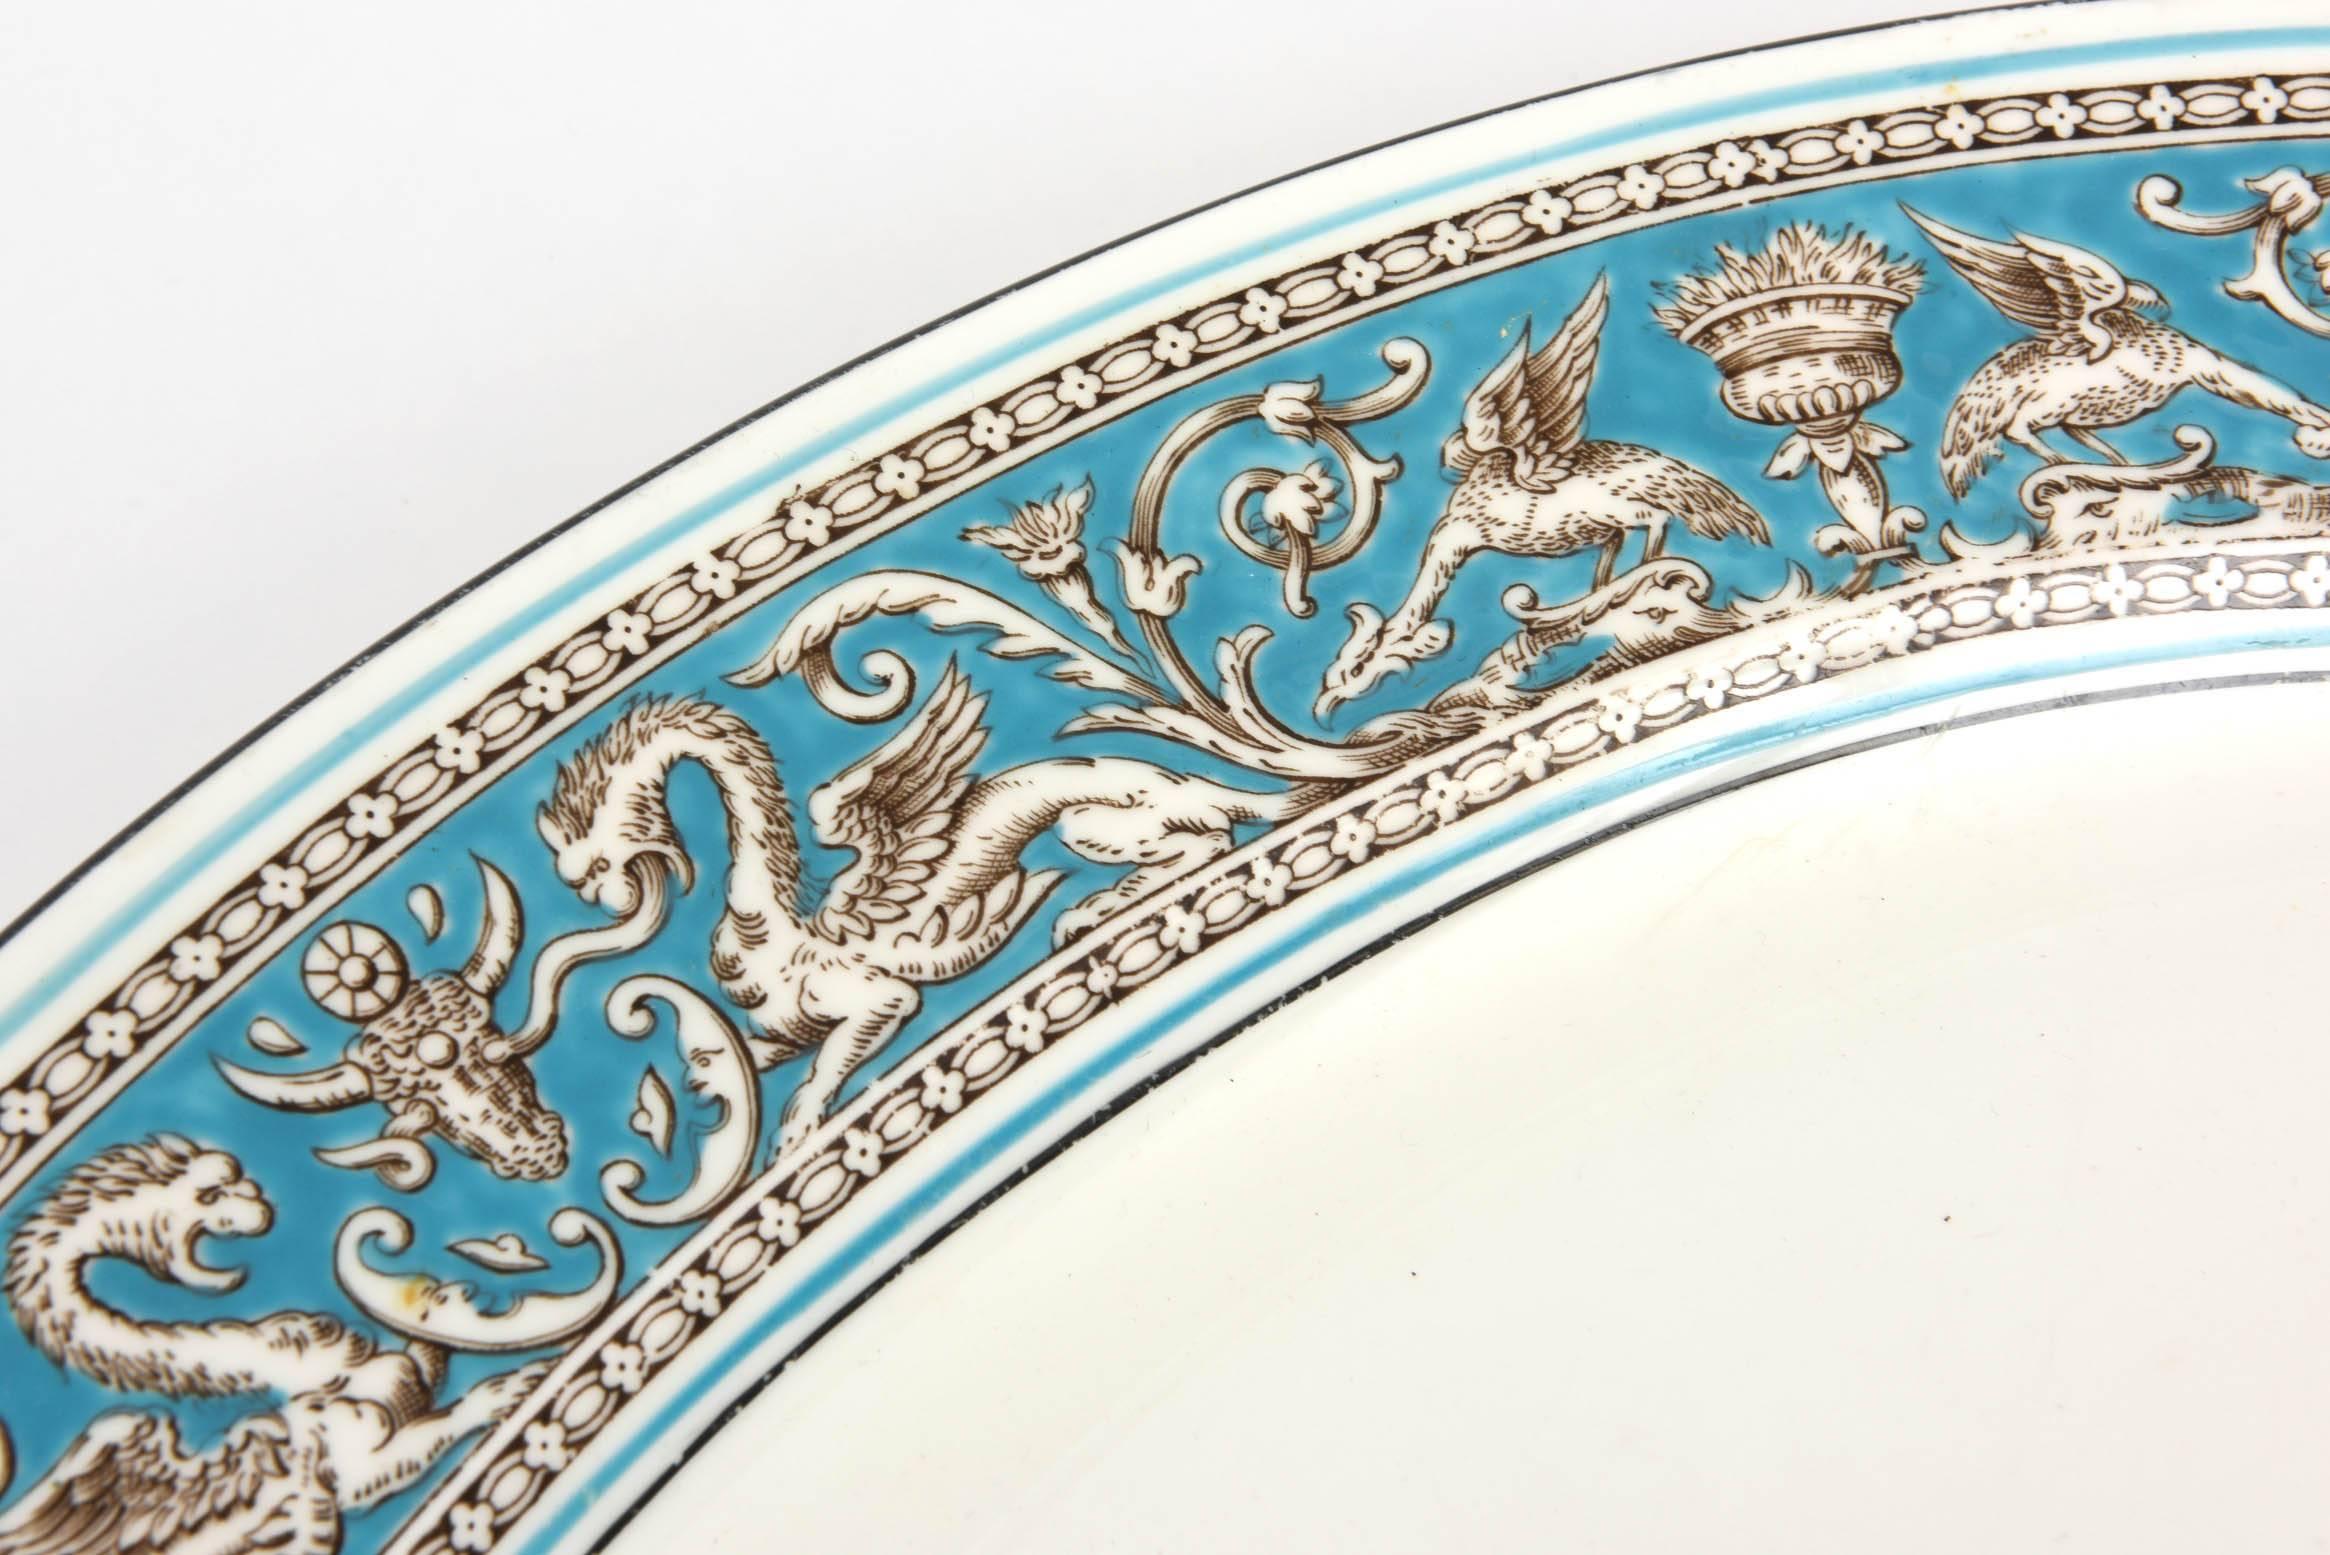 Wedgwood Turquoise China Dinner Service for 12, 92 Pieces Total, Florentine 3